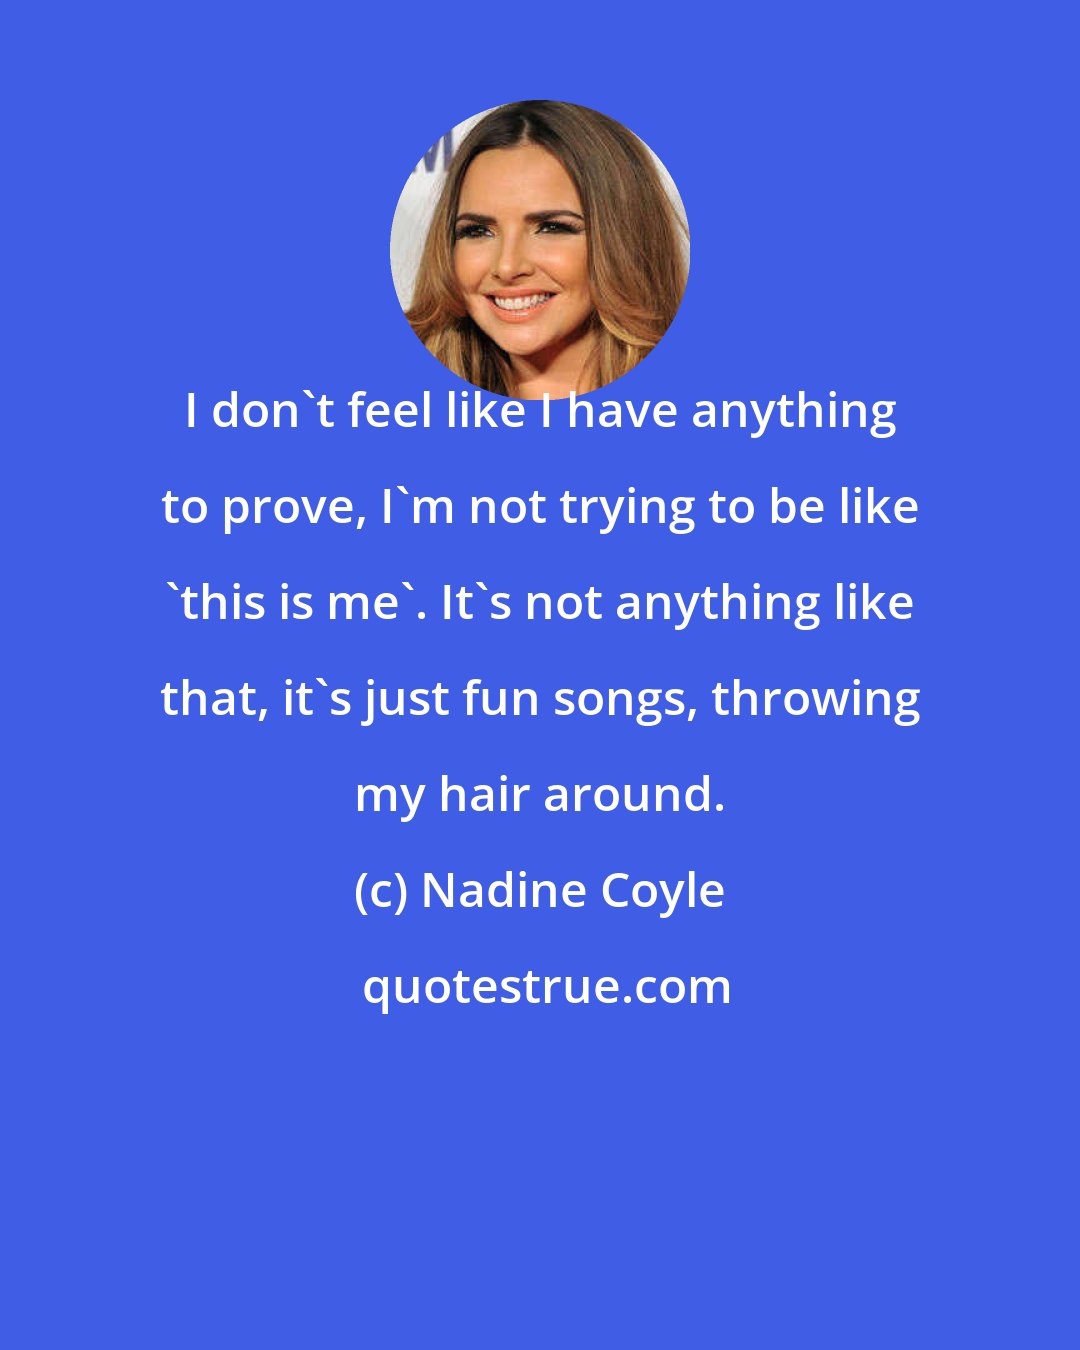 Nadine Coyle: I don't feel like I have anything to prove, I'm not trying to be like 'this is me'. It's not anything like that, it's just fun songs, throwing my hair around.